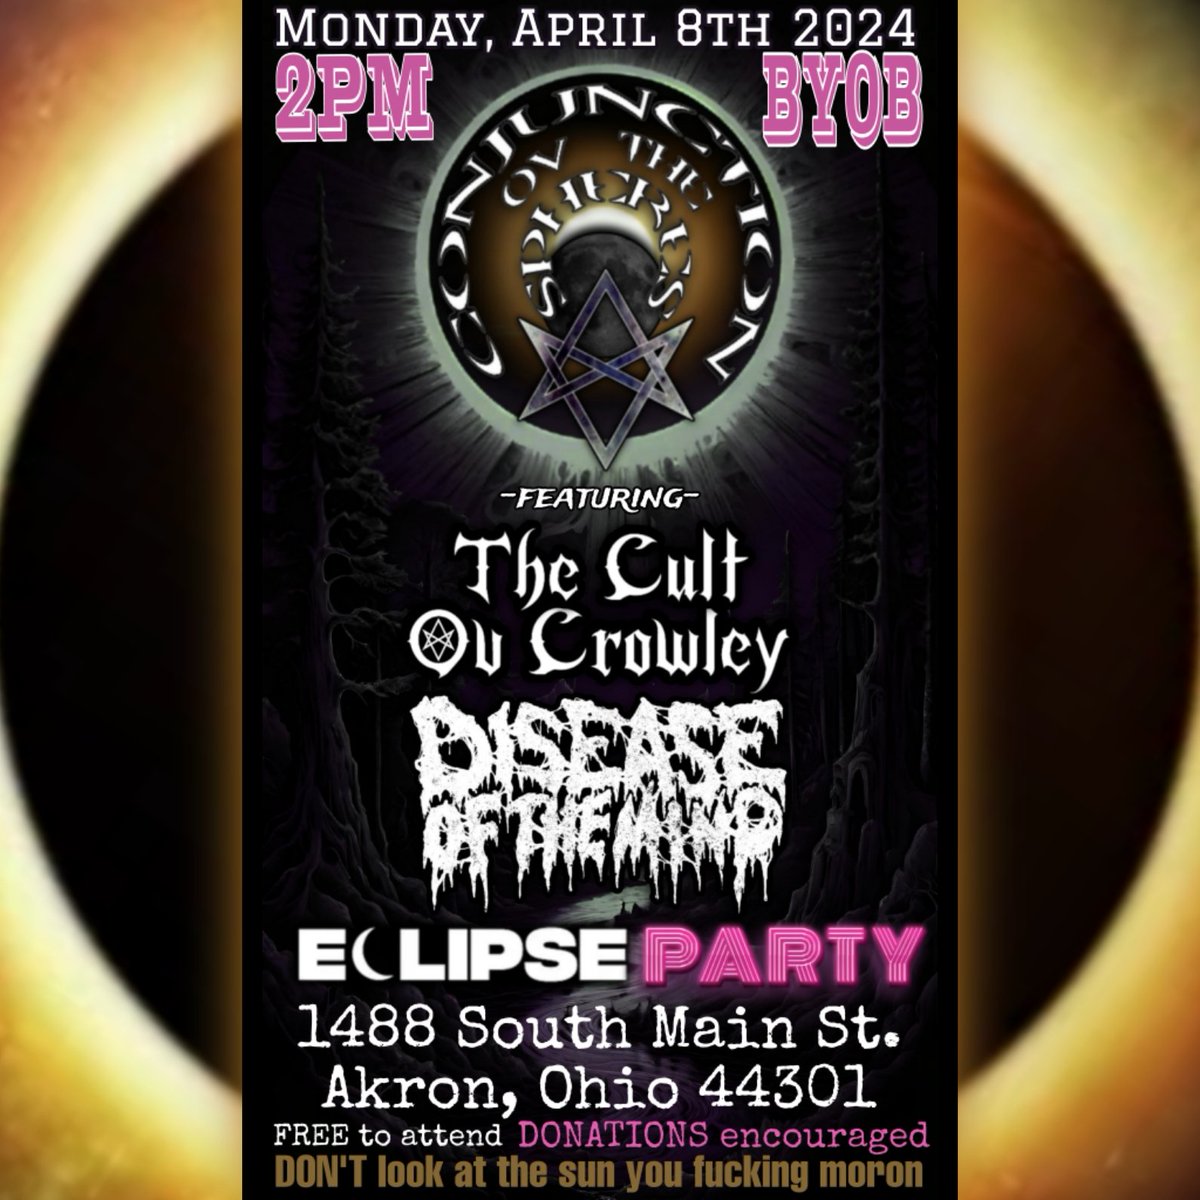 Music starts at 2pm. Get there early and bring your special eclipse glasses for an unforgettable show. #thecultovcrowley #ohiorock #ohiometal #akronrock #akrondoom #akronmetal #doom #ohiodoom #independentartist #undergroundmusic #livemusic #localmusic #solareclipse2024 #akron